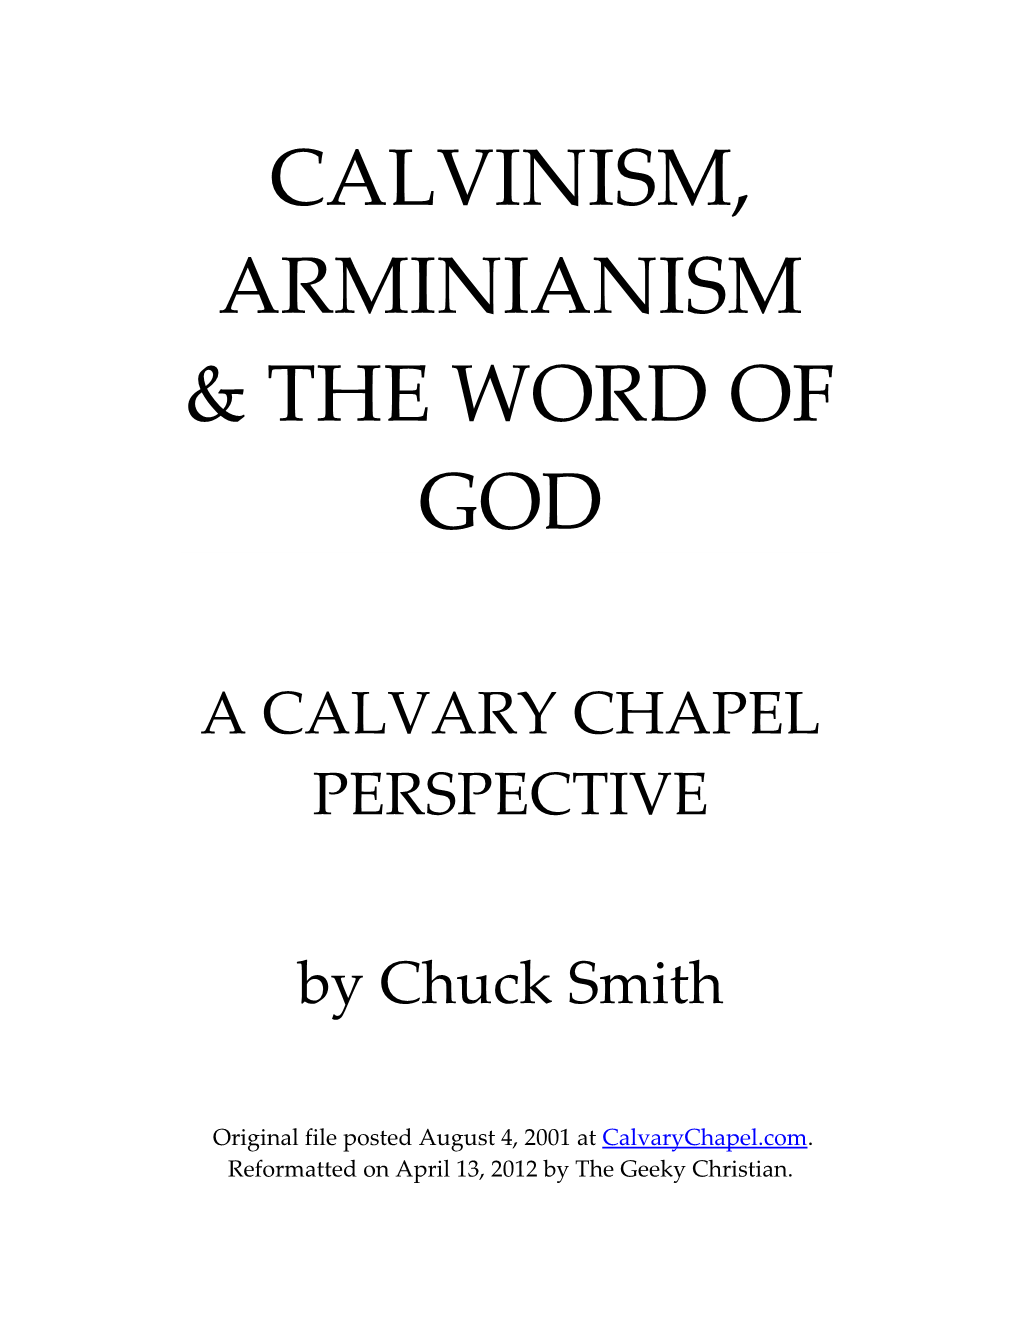 Calvinism, Arminianism & the Word of God